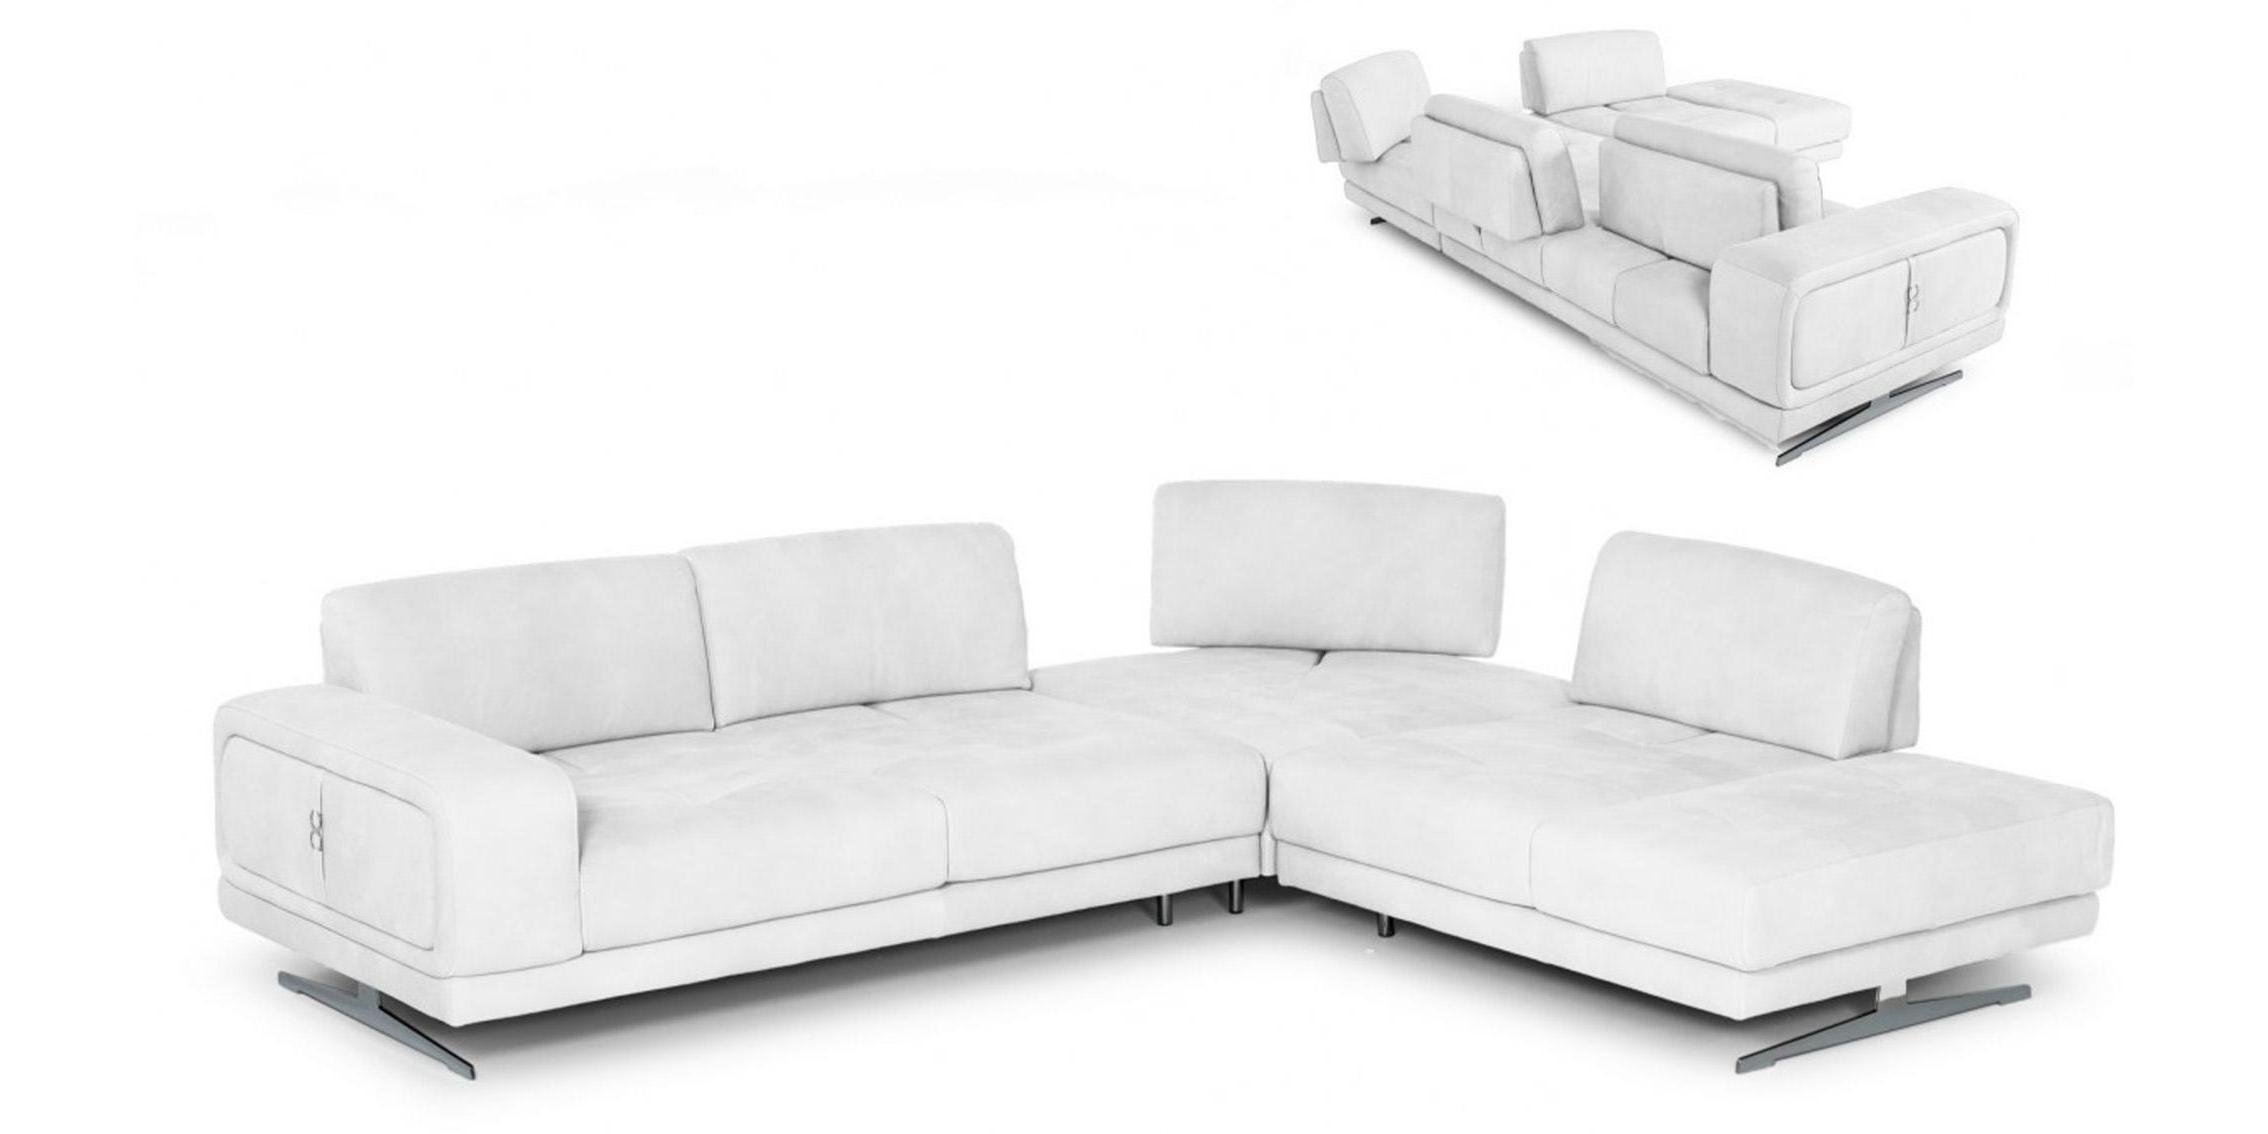 Contemporary, Modern Sectional Sofa VGCCMOOD-SPAZIO-100-WHT-RAF-SECT 79193 VGCCMOOD-SPAZIO-100-WHT-RAF-SECT in White Italian Leather